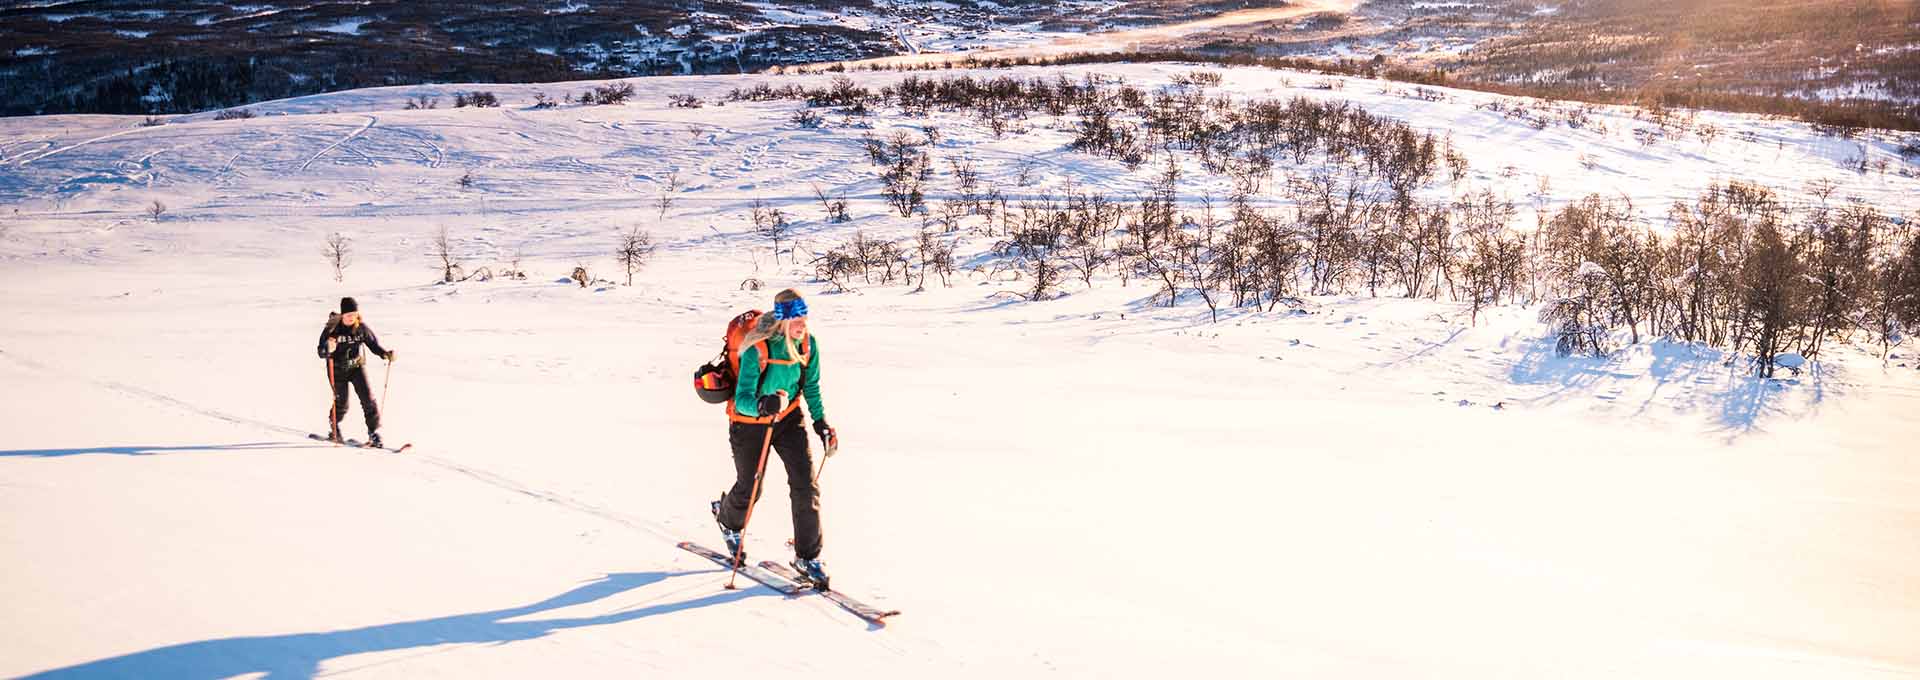 Two persons try out ski touring